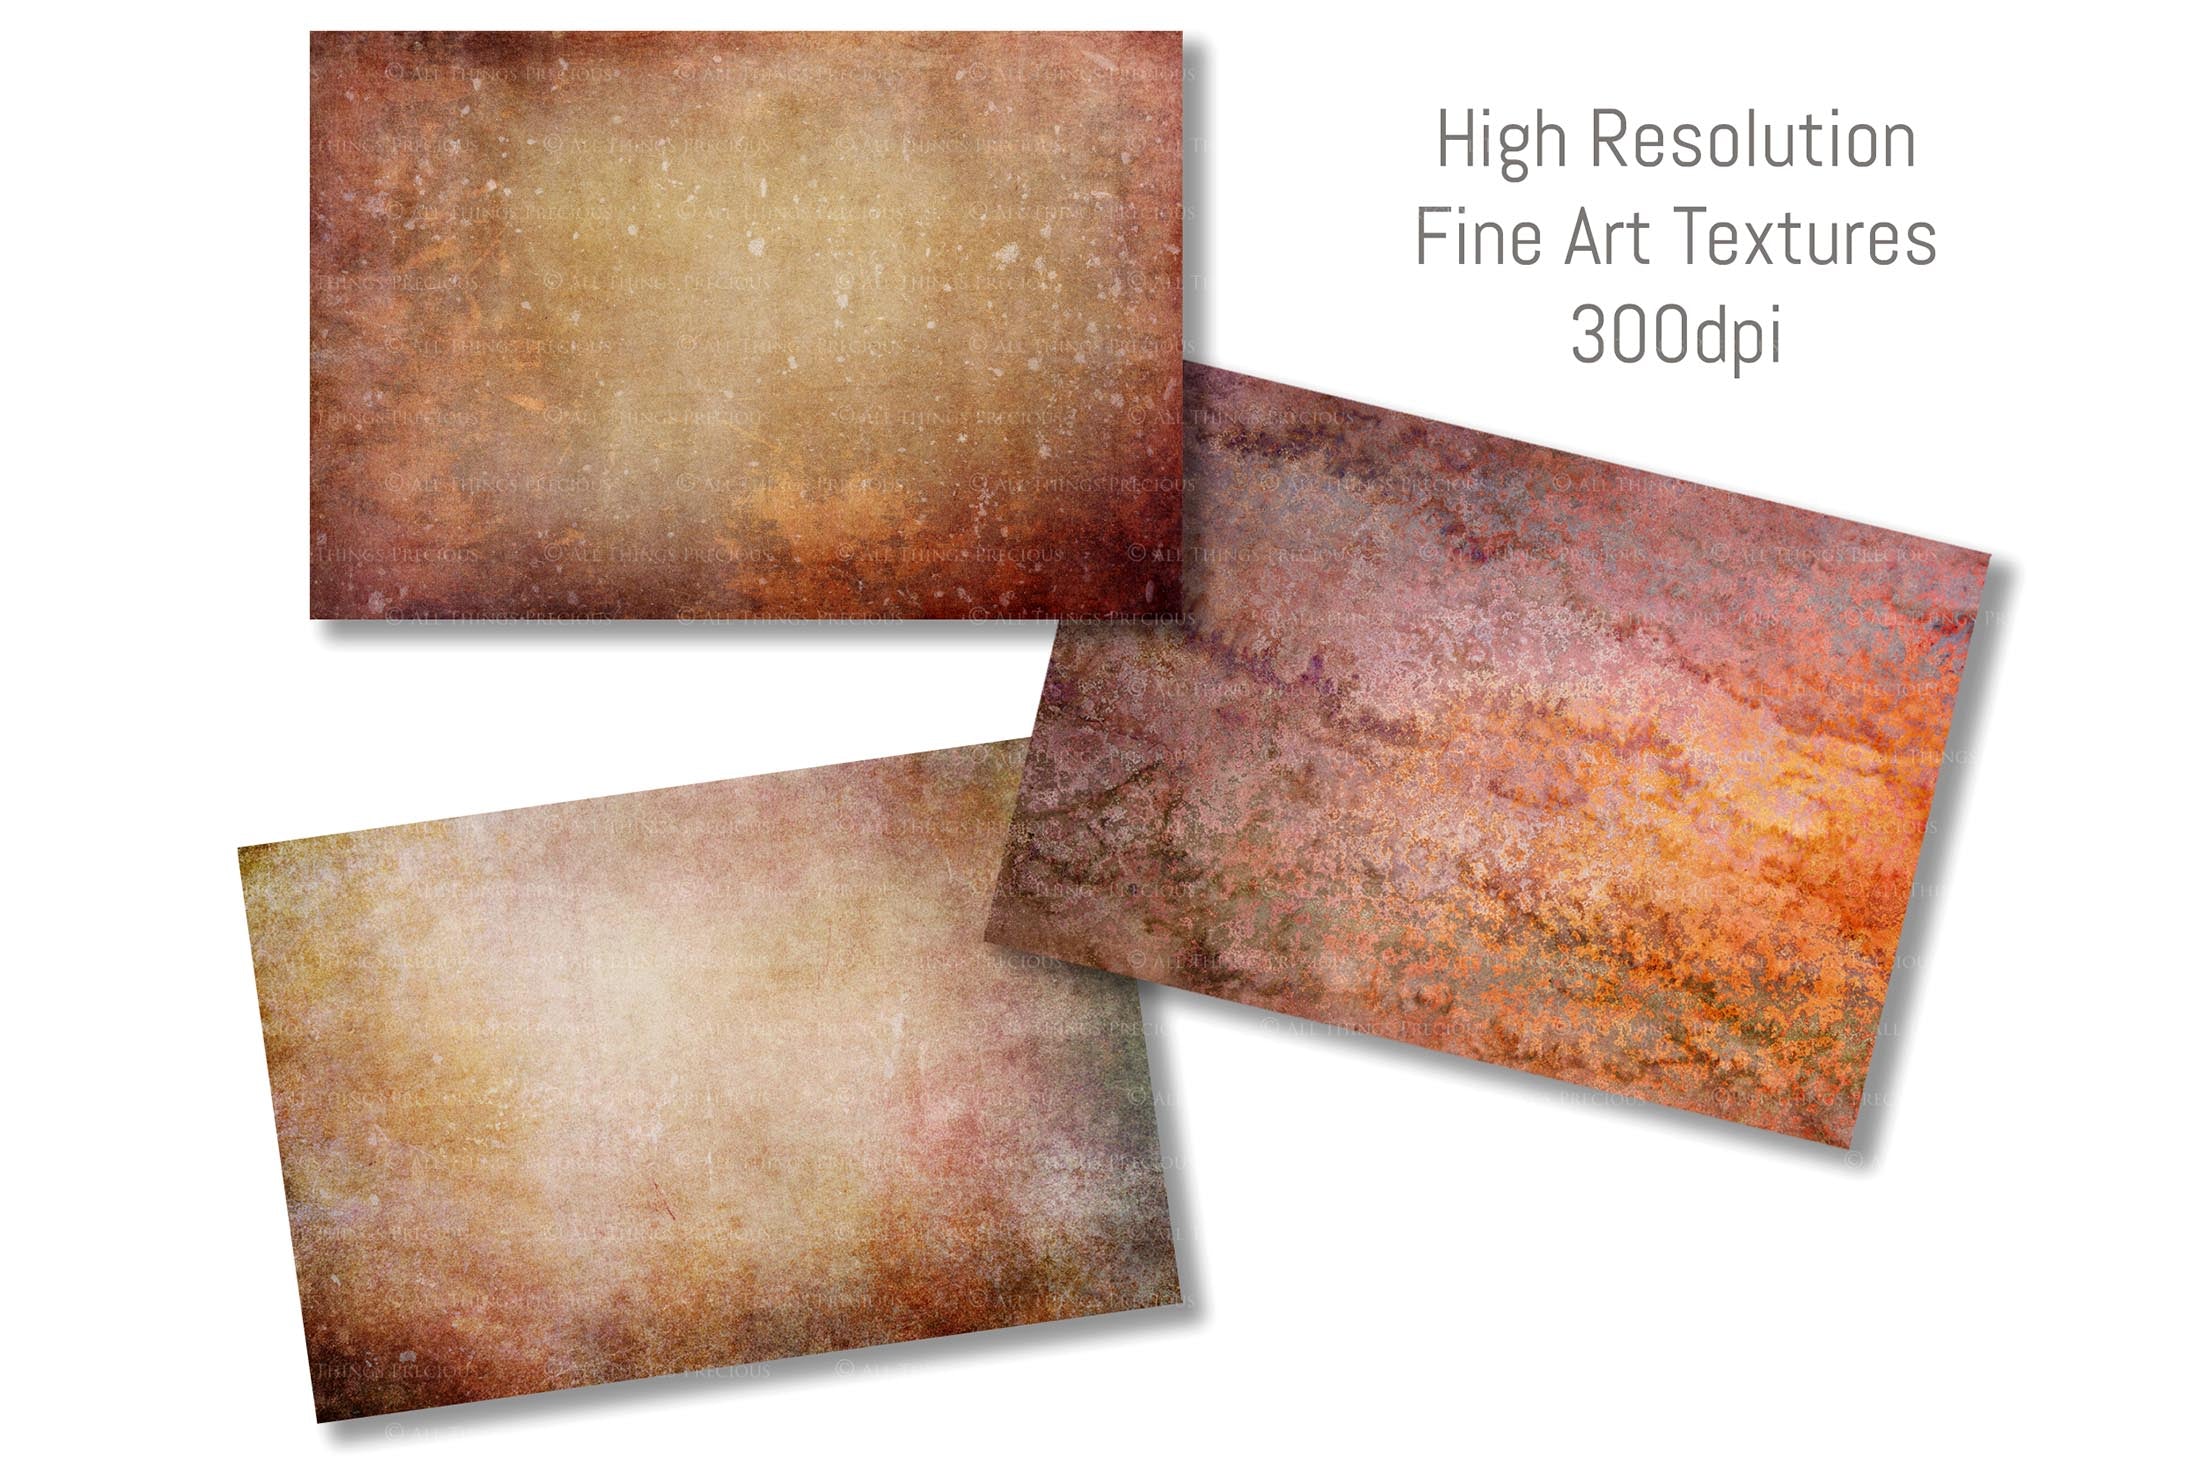 Fine Art Textures. For photography or print as backdrops. High resolution download files. Grunge, Warm, Light, Digital Add Ons. Canvas, Dark, Painterly, Color design. Digital Background Jpeg overlay. Scrapbooking Paper, Printable Wall Art, Photoshop photography editing Graphic Assets. by ATP textures.